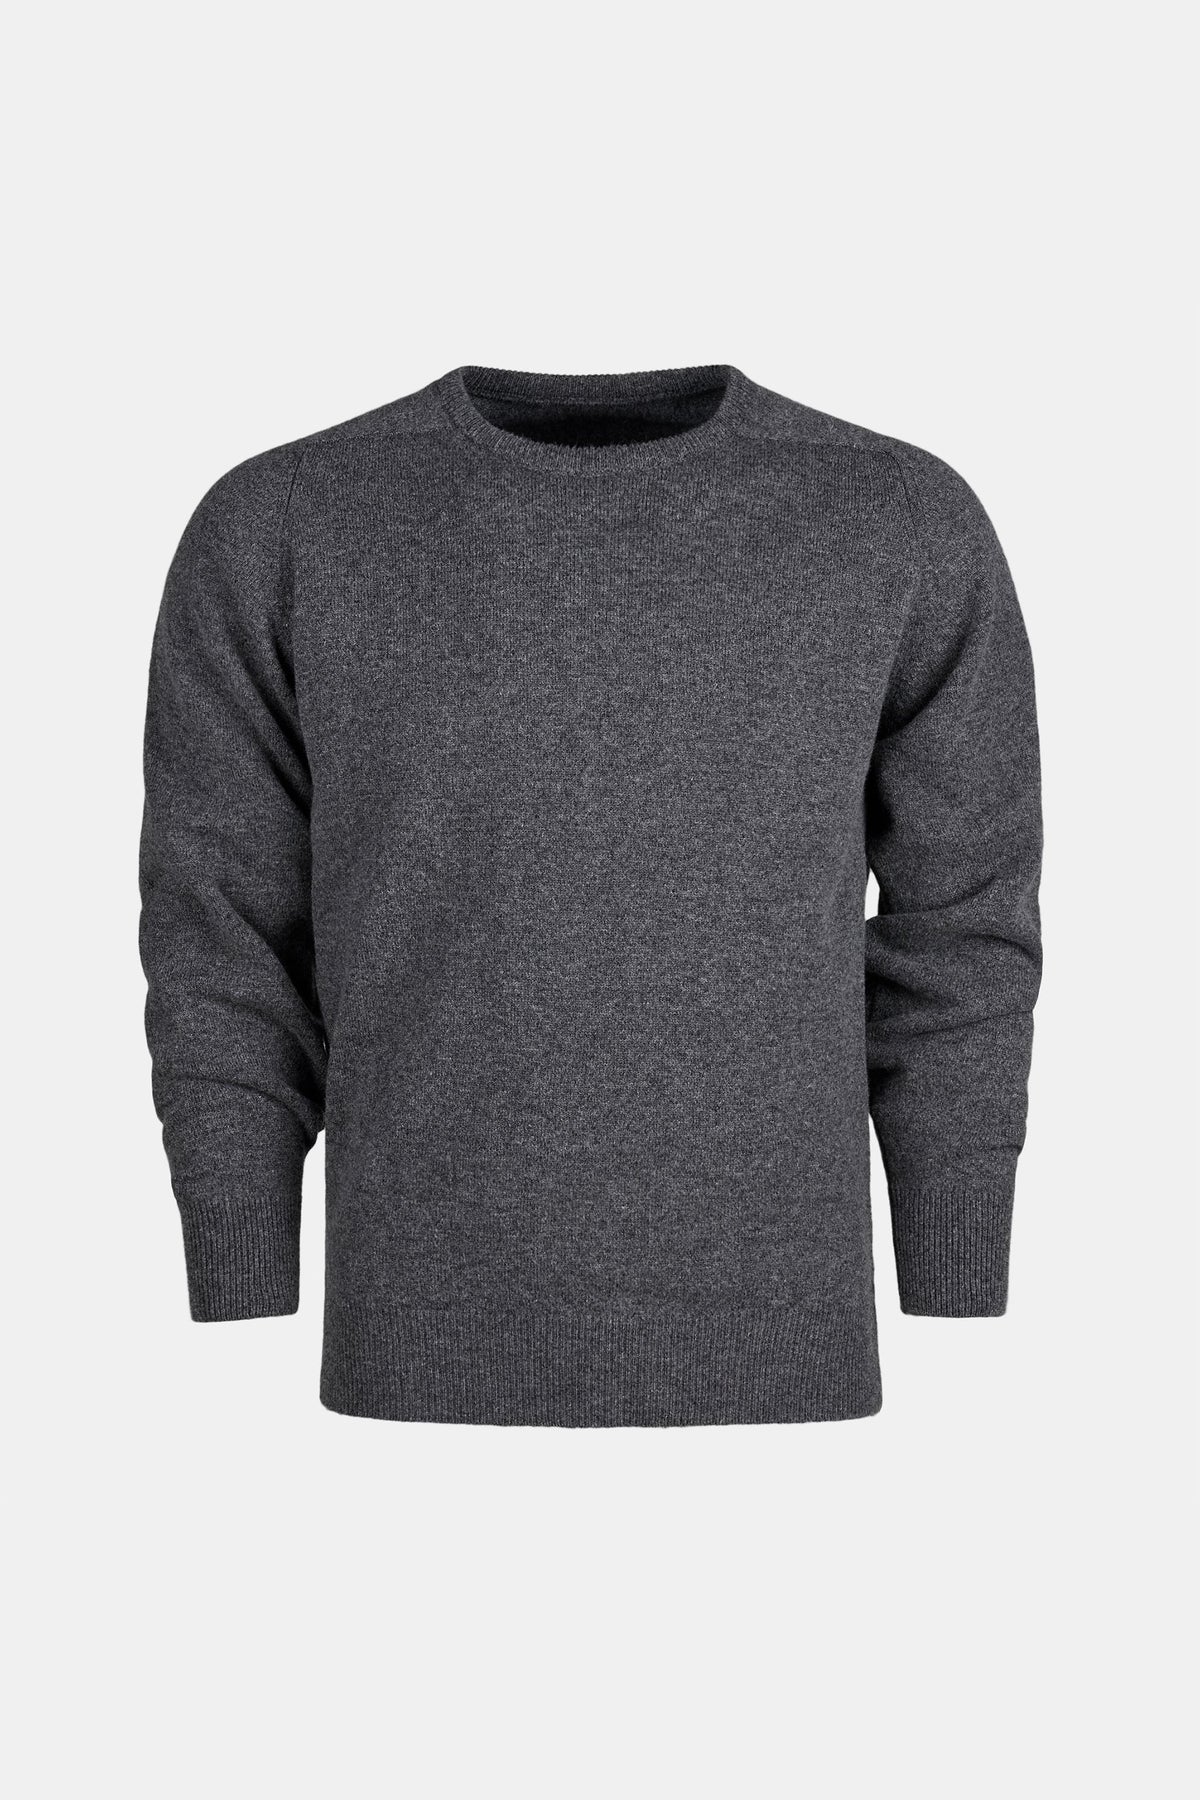 
            Ghost mannewuin image of grey lambswool crew neck